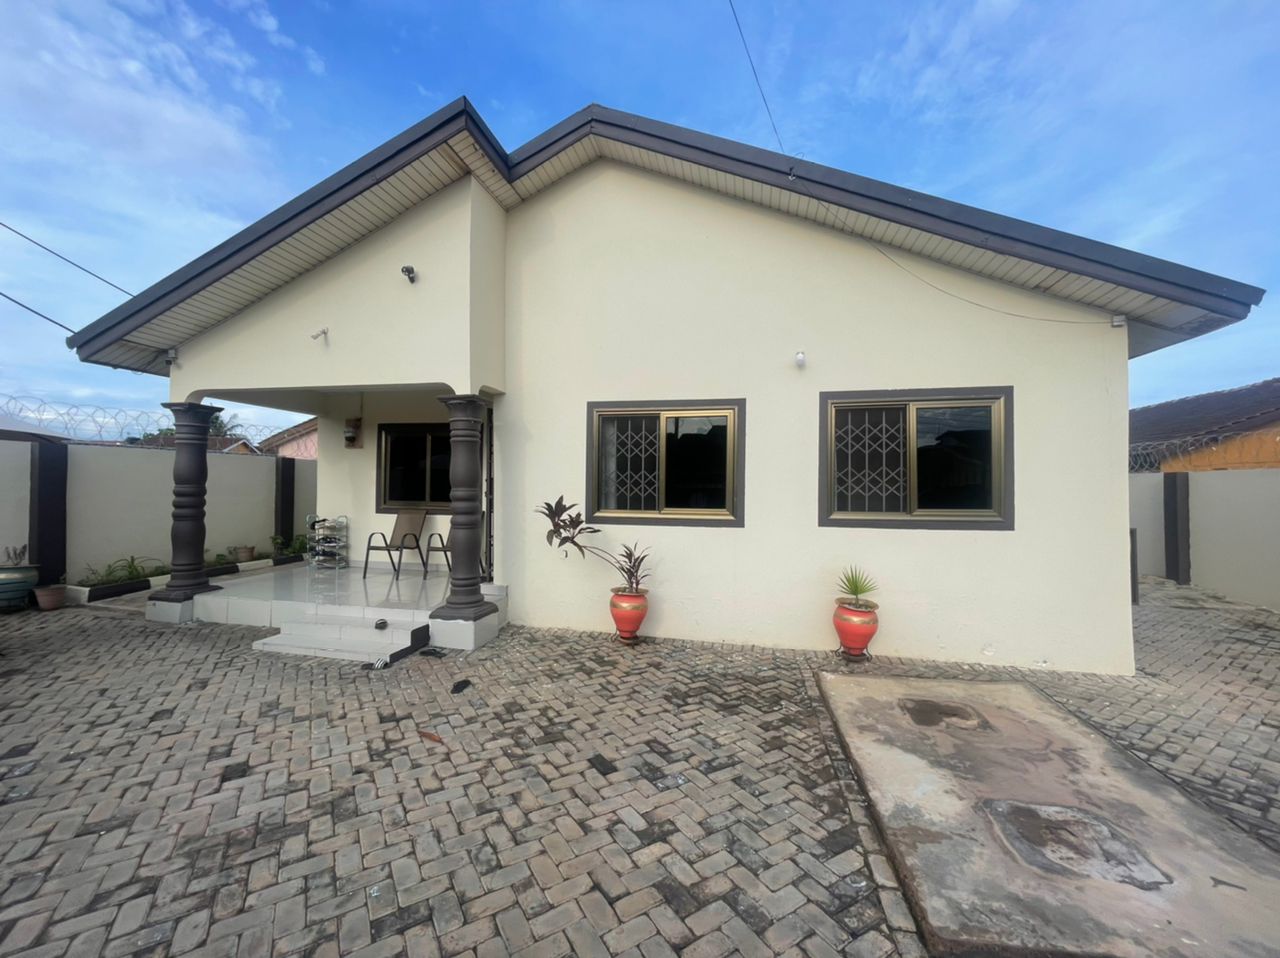 3 BEDROOM HOUSE FOR SALE AT LAKESIDE ESTATE